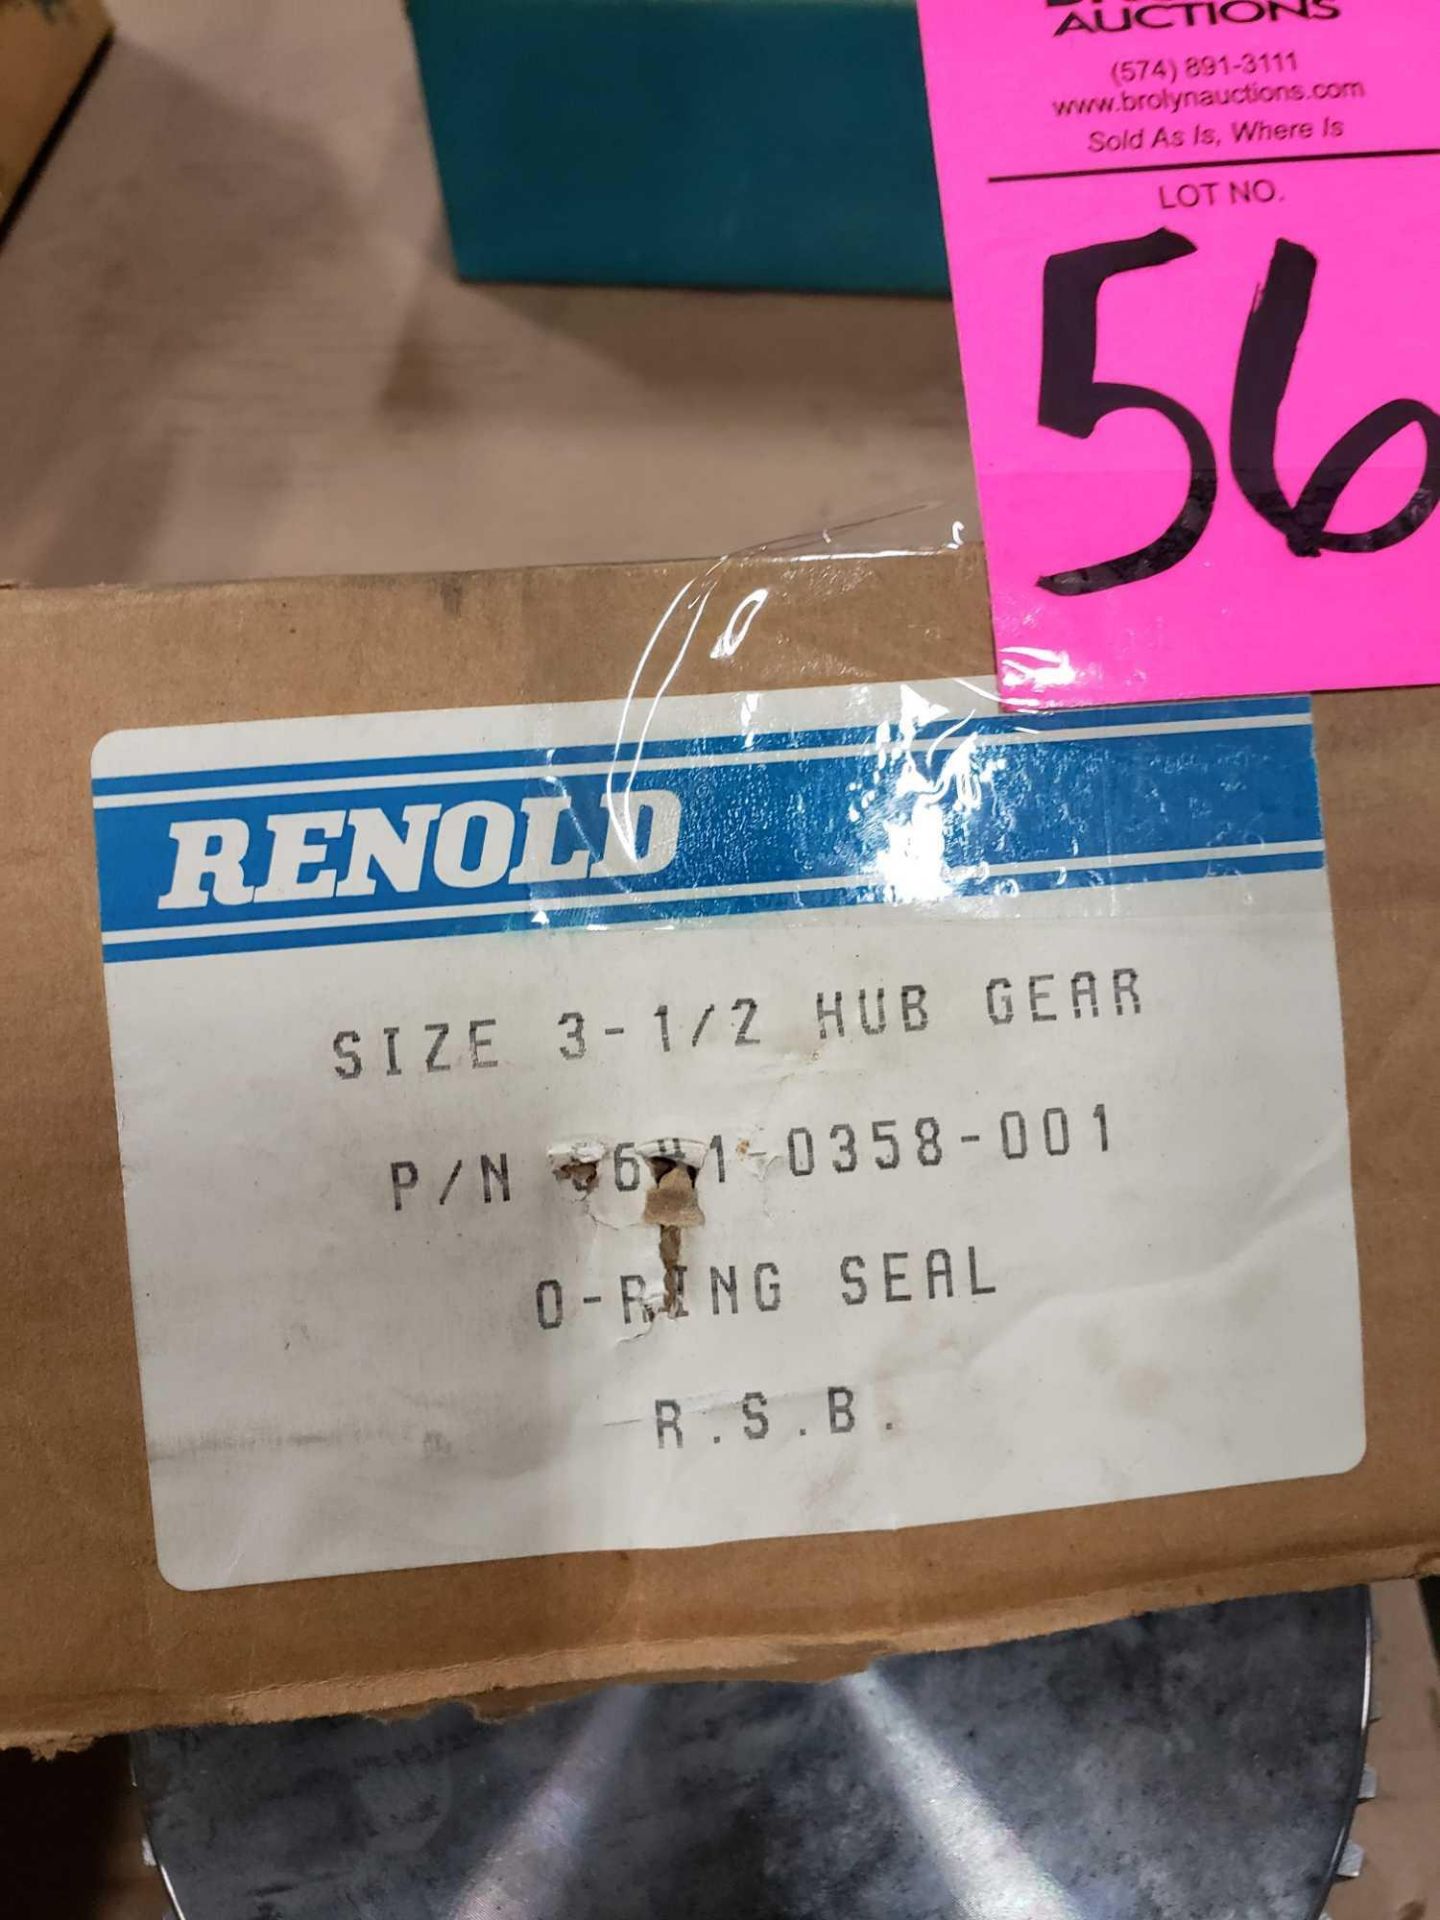 Renold hub gear 3 1/2 part number 6641-0358-001. New in box. - Image 2 of 2